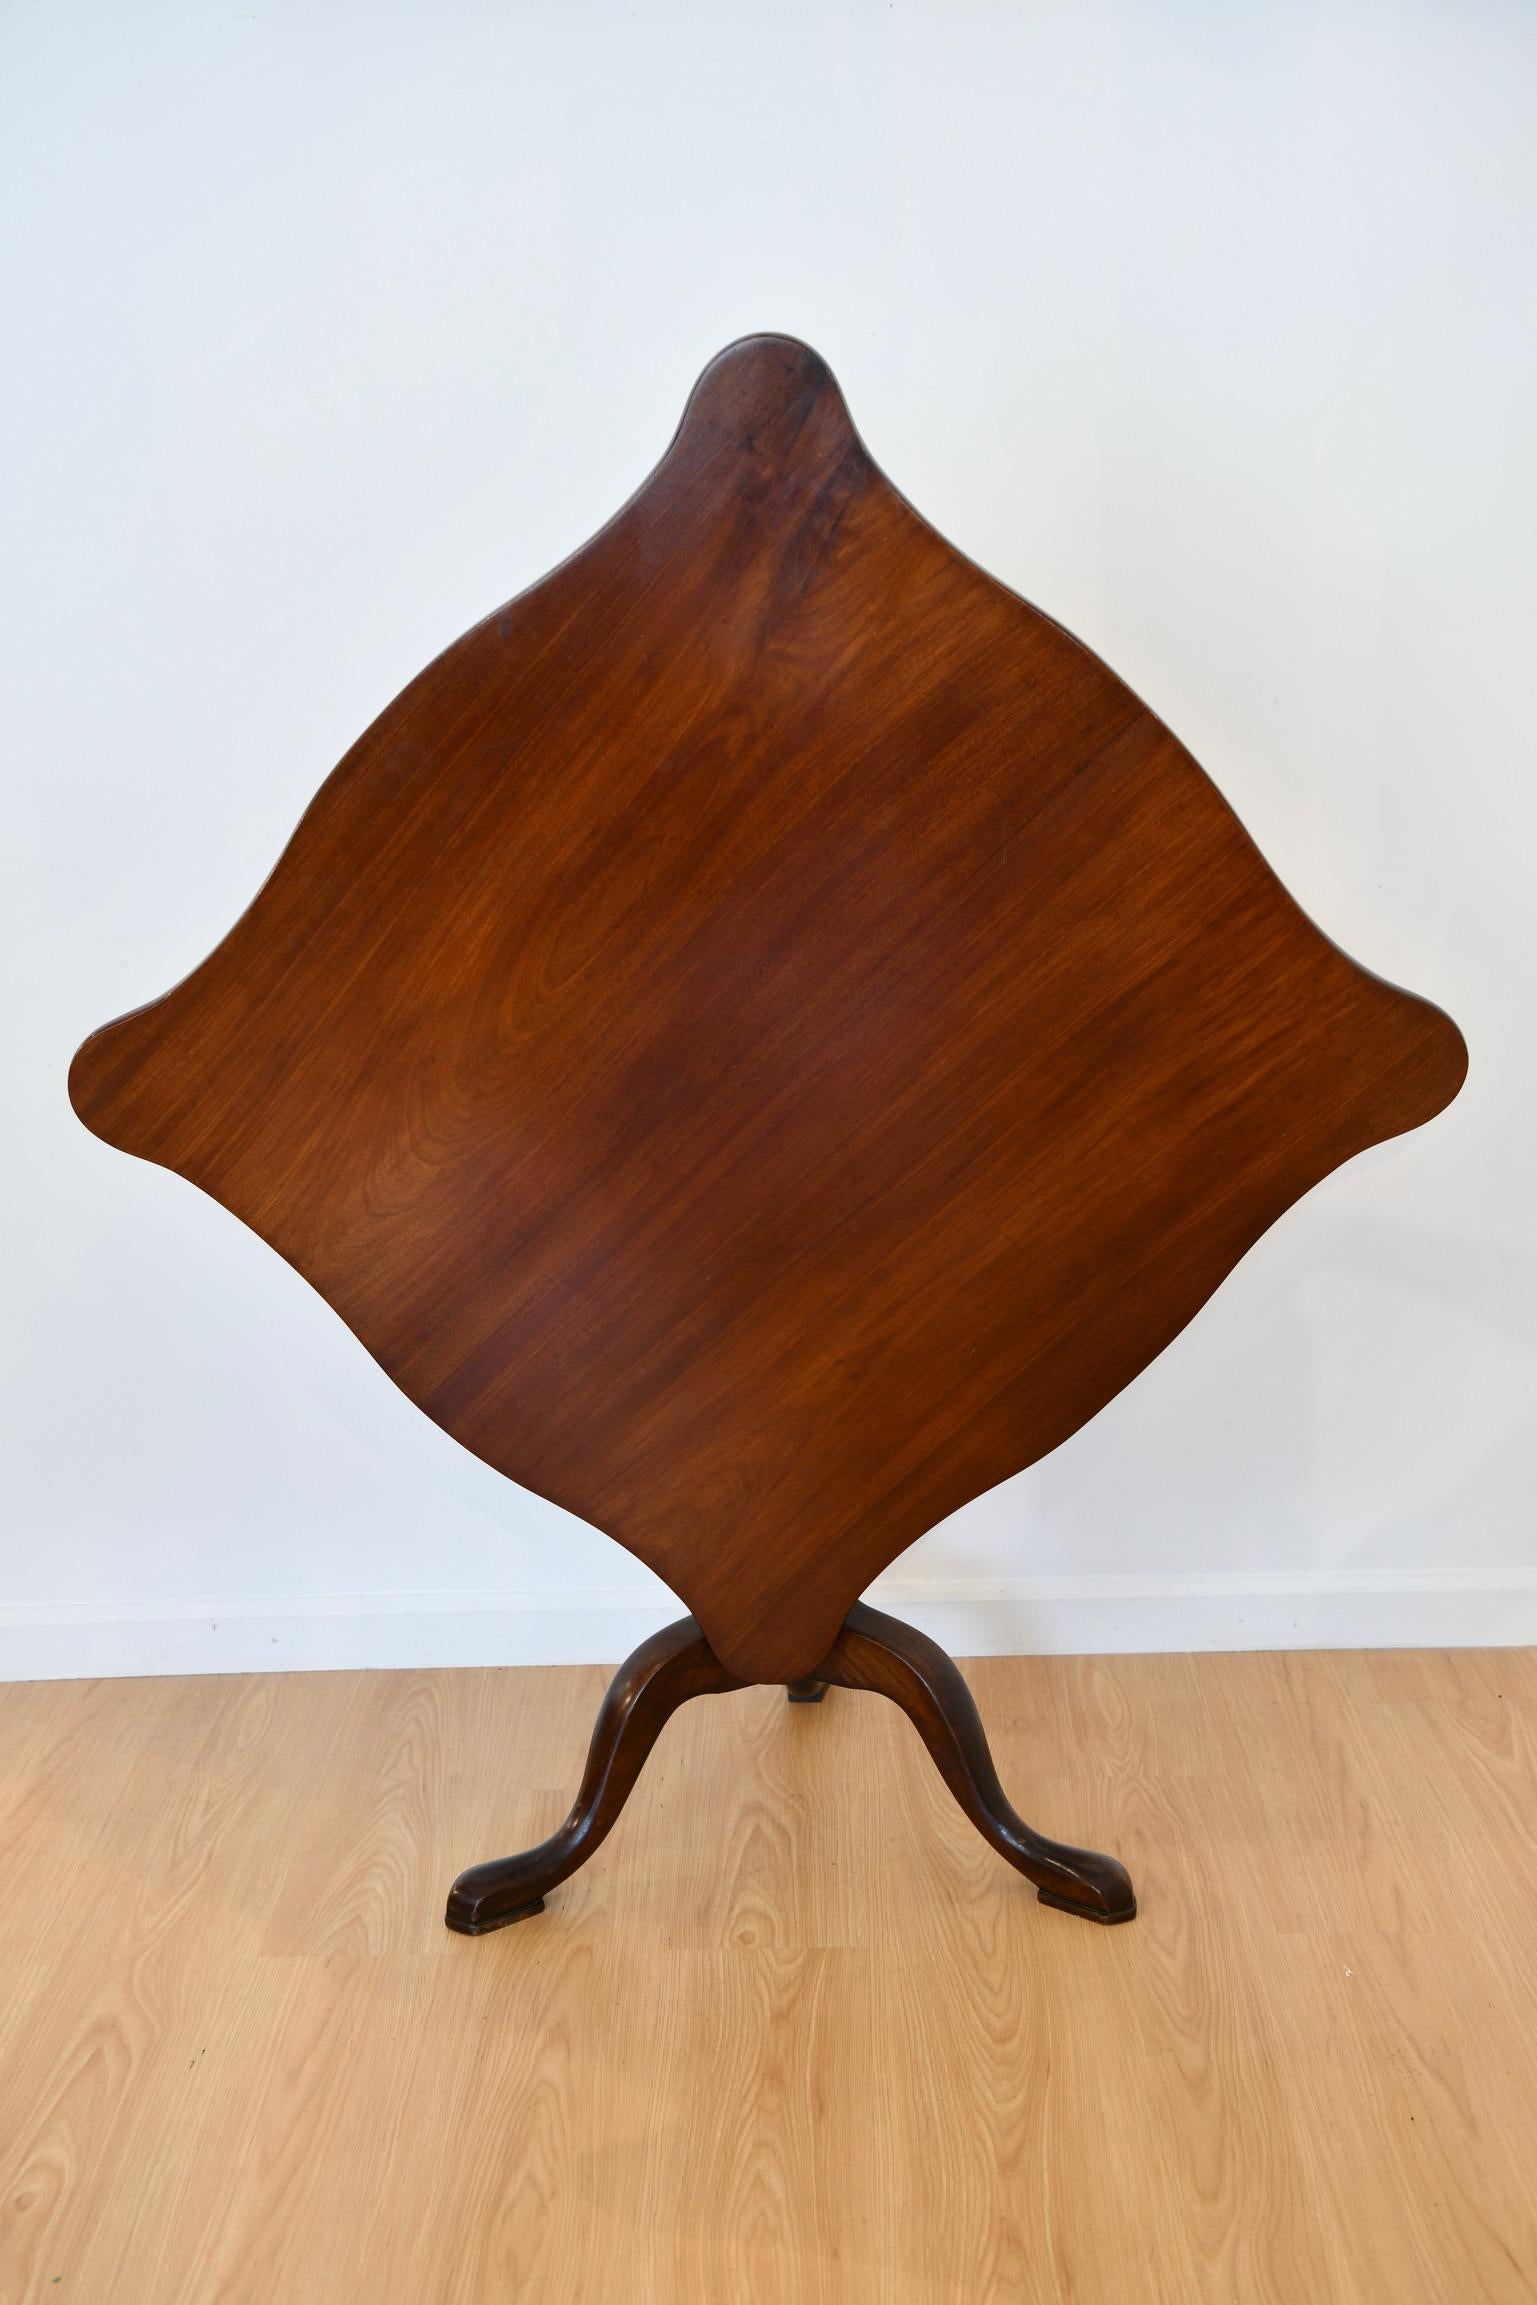 Queen Anne mahogany tilt-top breakfast table with undulating rectangular top, circa 18th century. Dimensions: 28.75